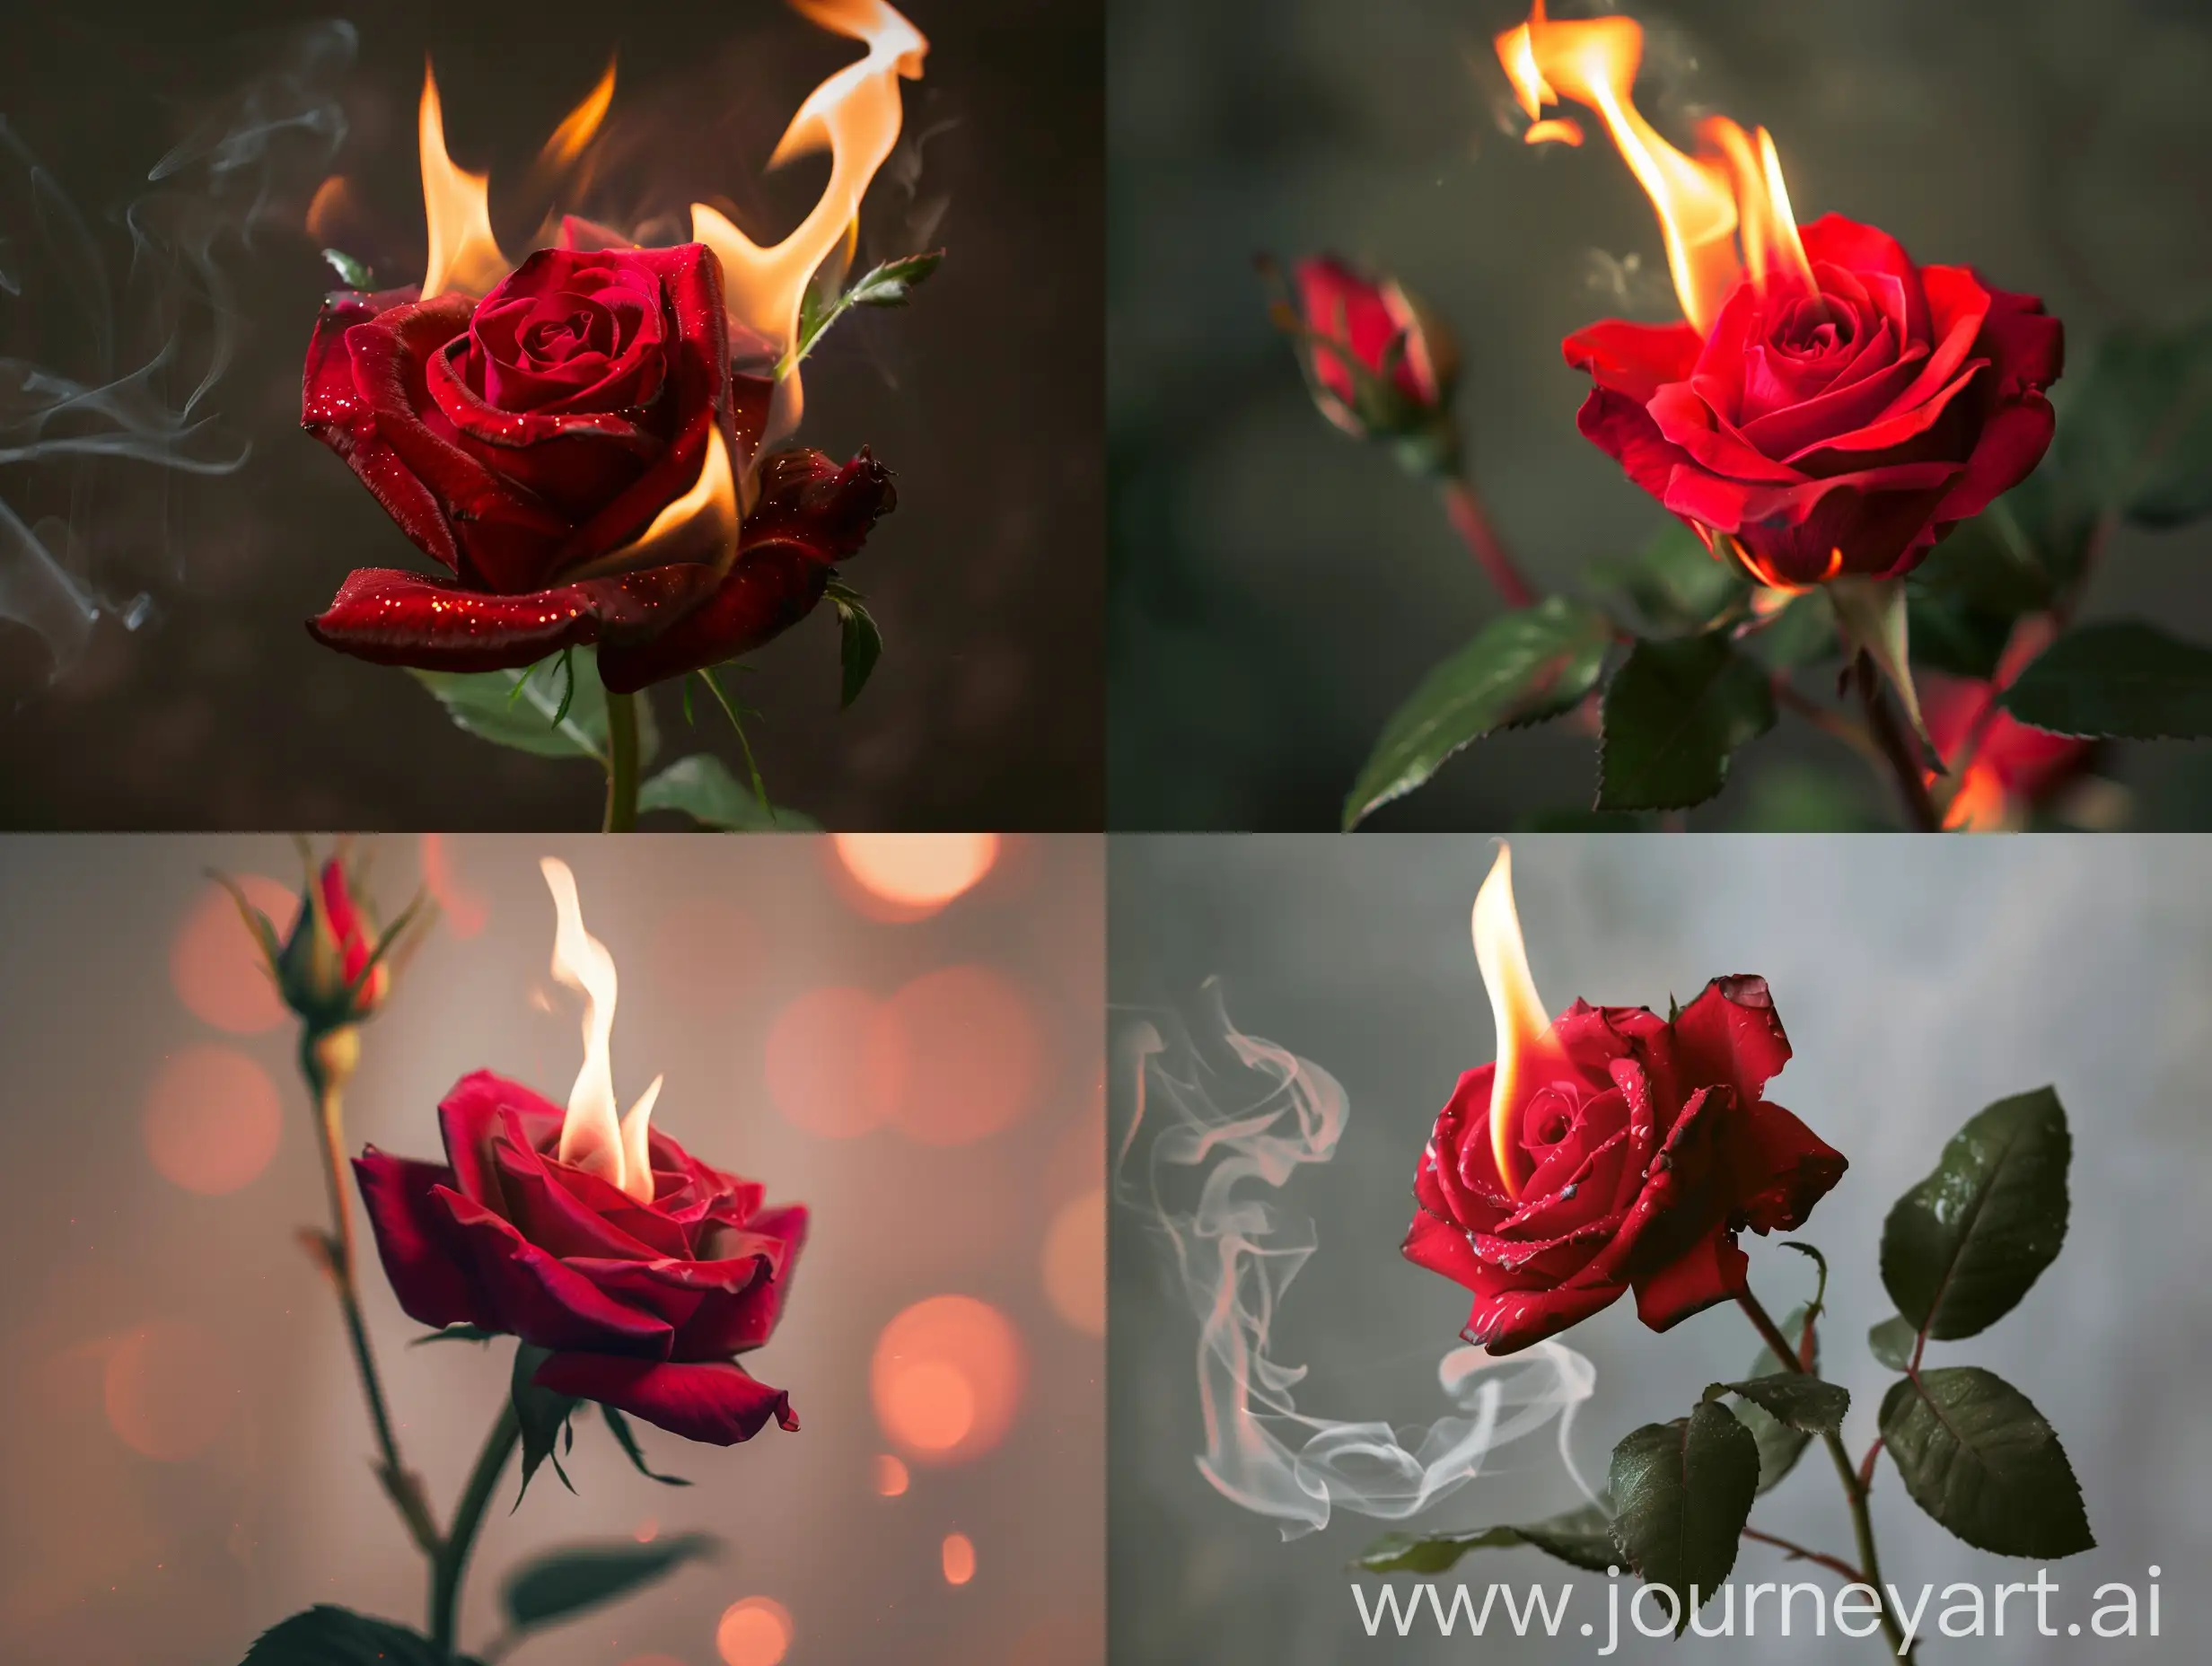 Realistic-Red-Rose-with-Flame-Fiery-Floral-Artwork